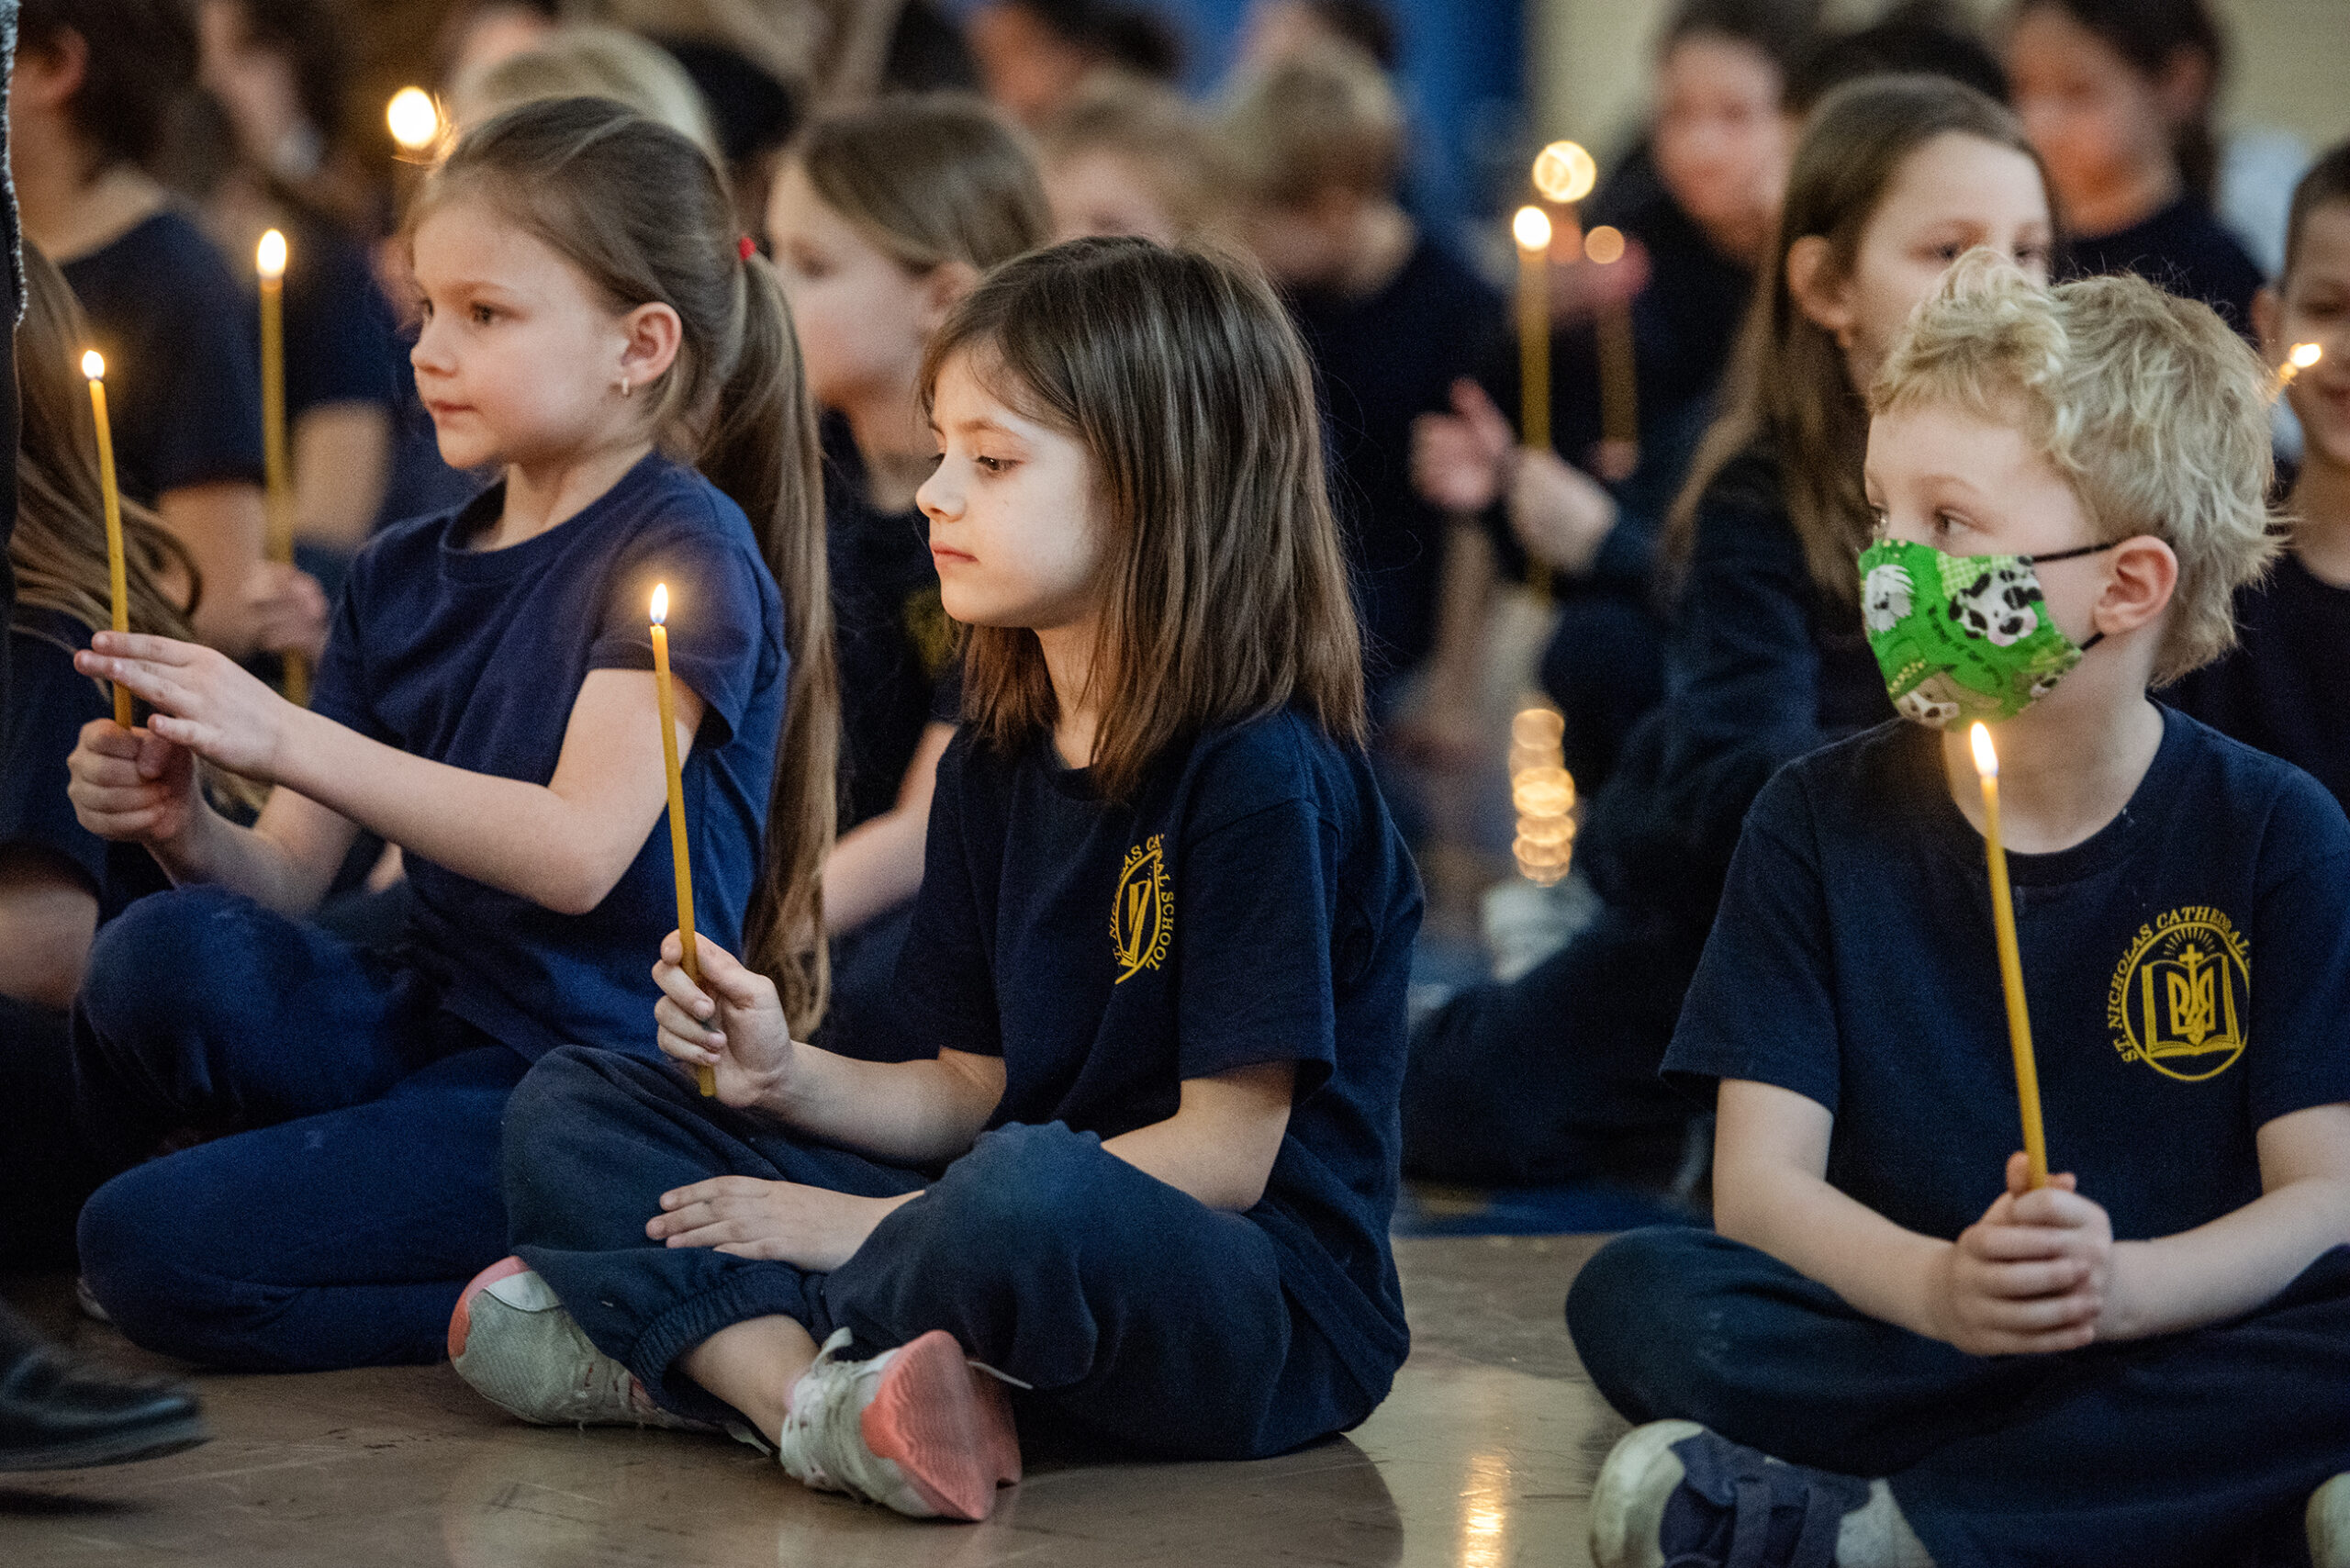 A group of children sit with lit candles.